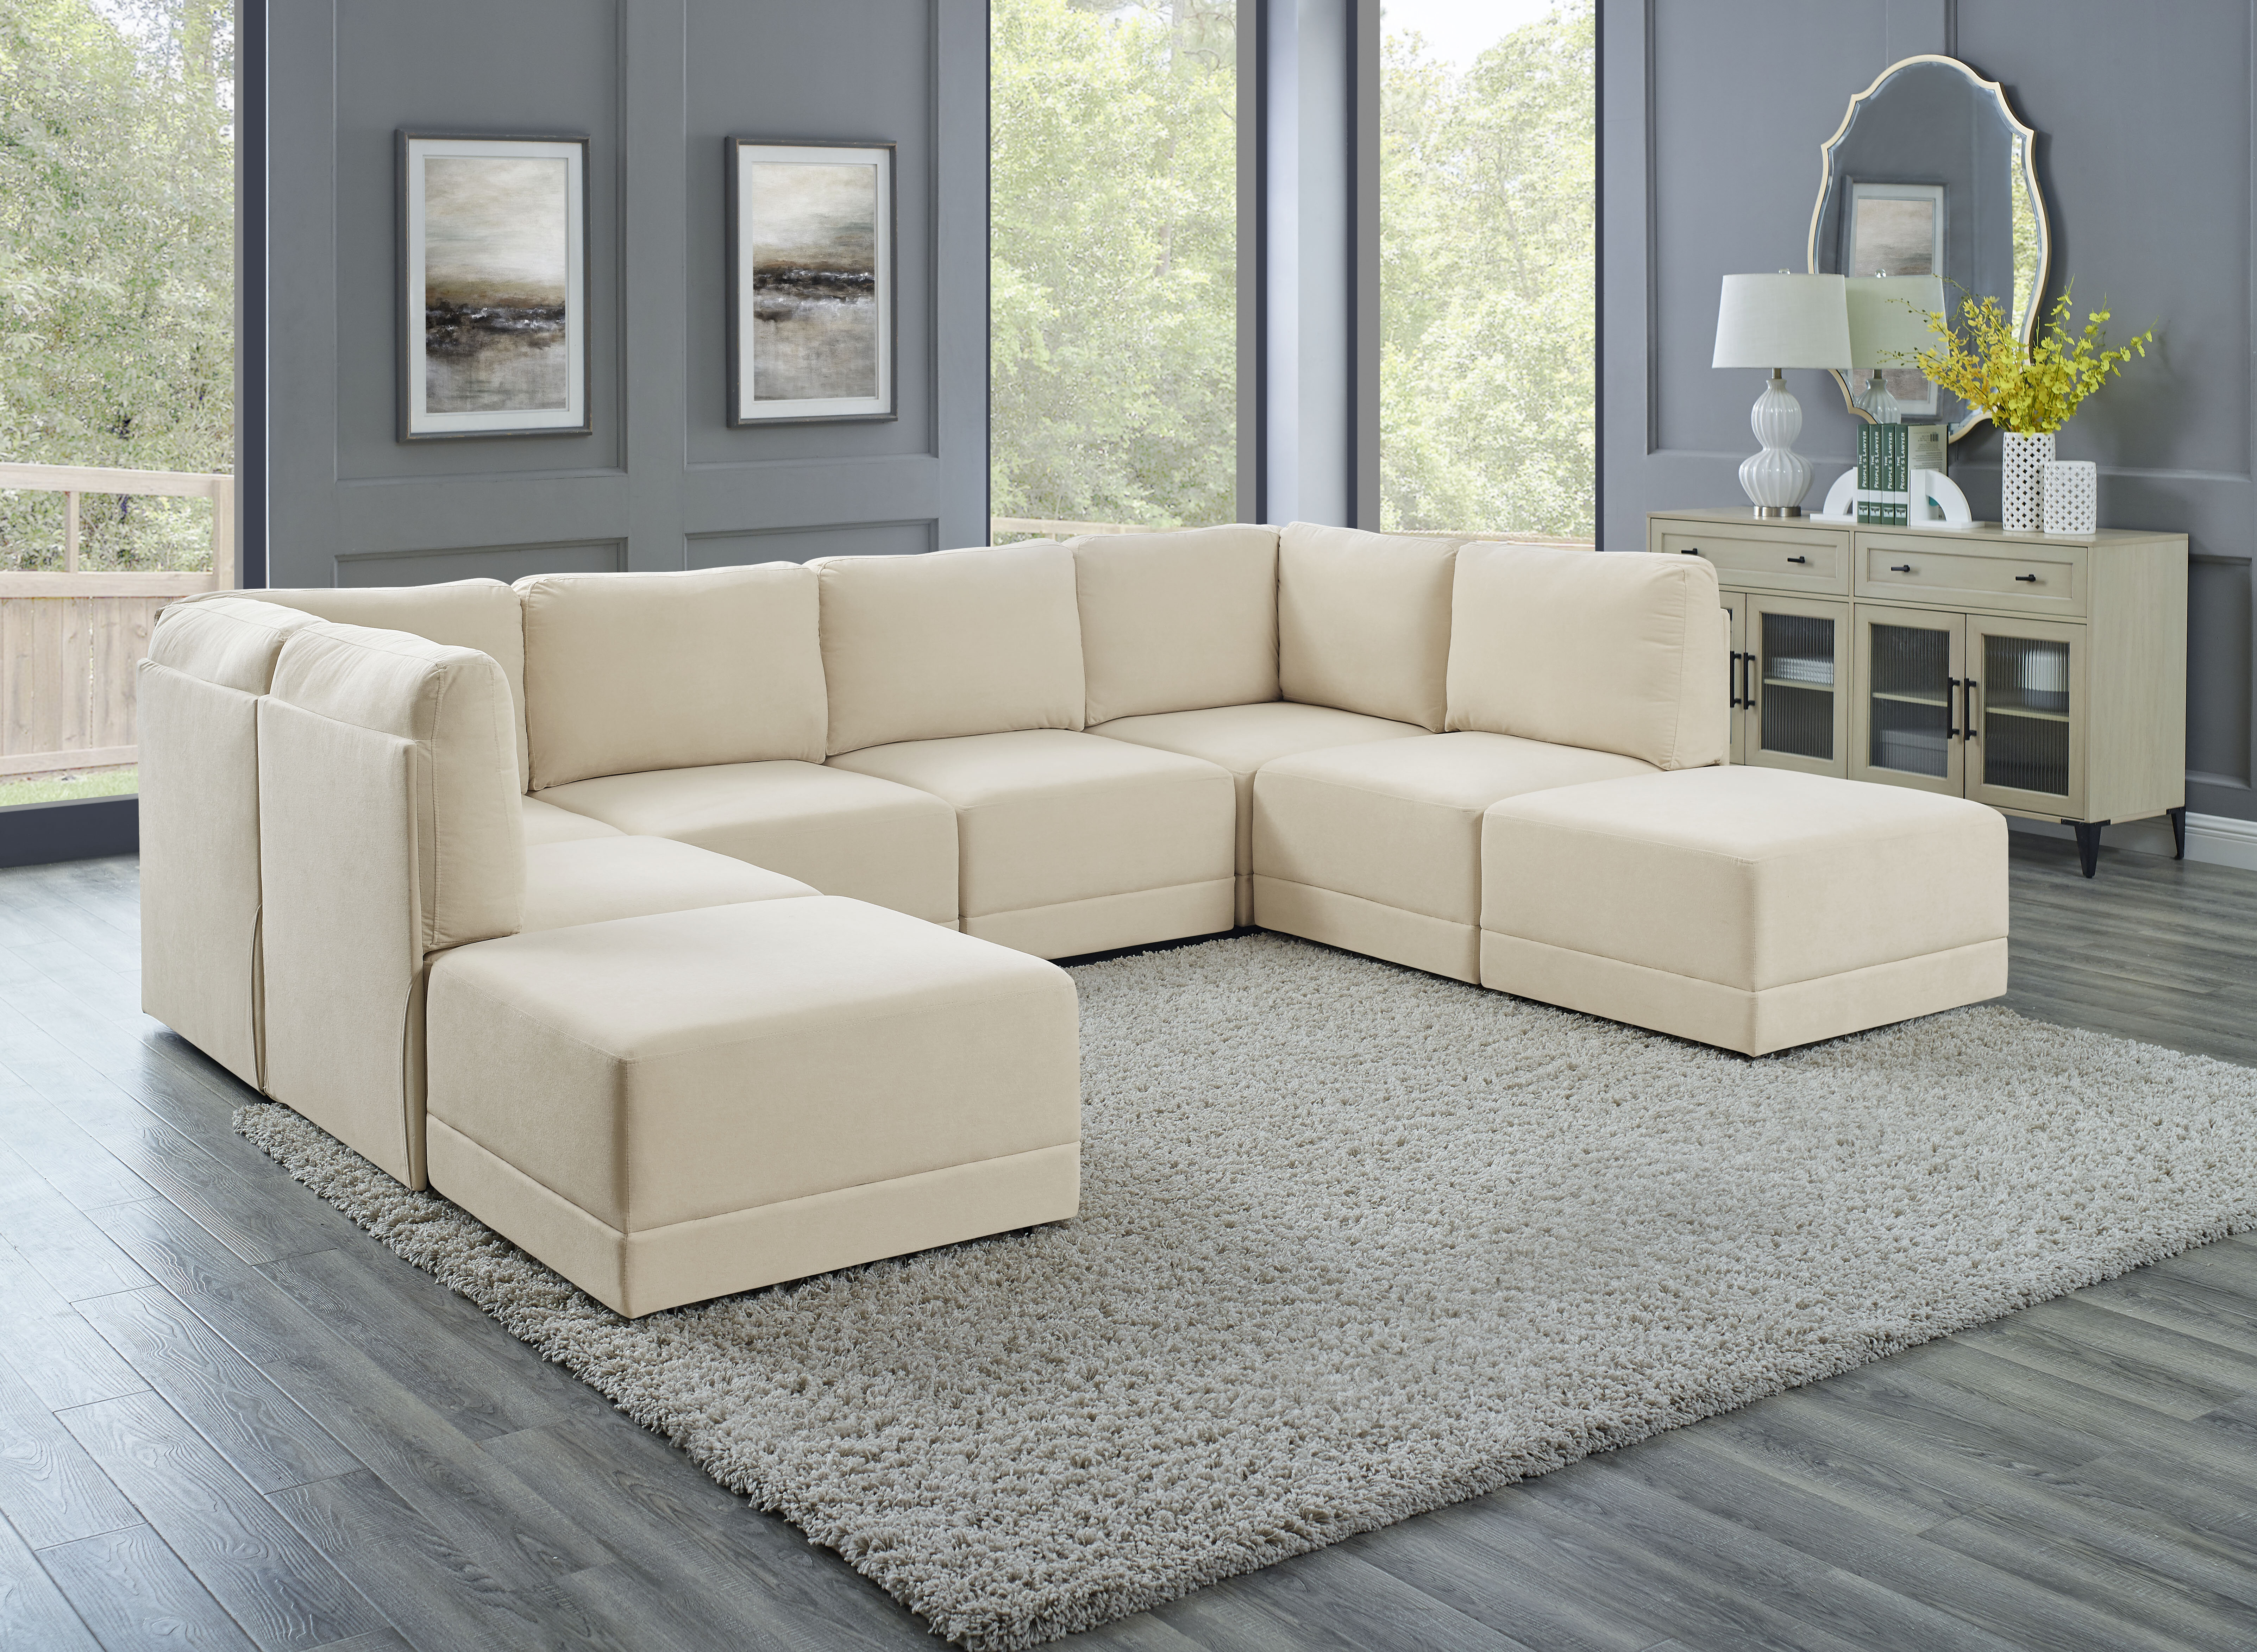 Rodrigue 116" Wide Symmetrical Modular Corner Sectional with Ottoman